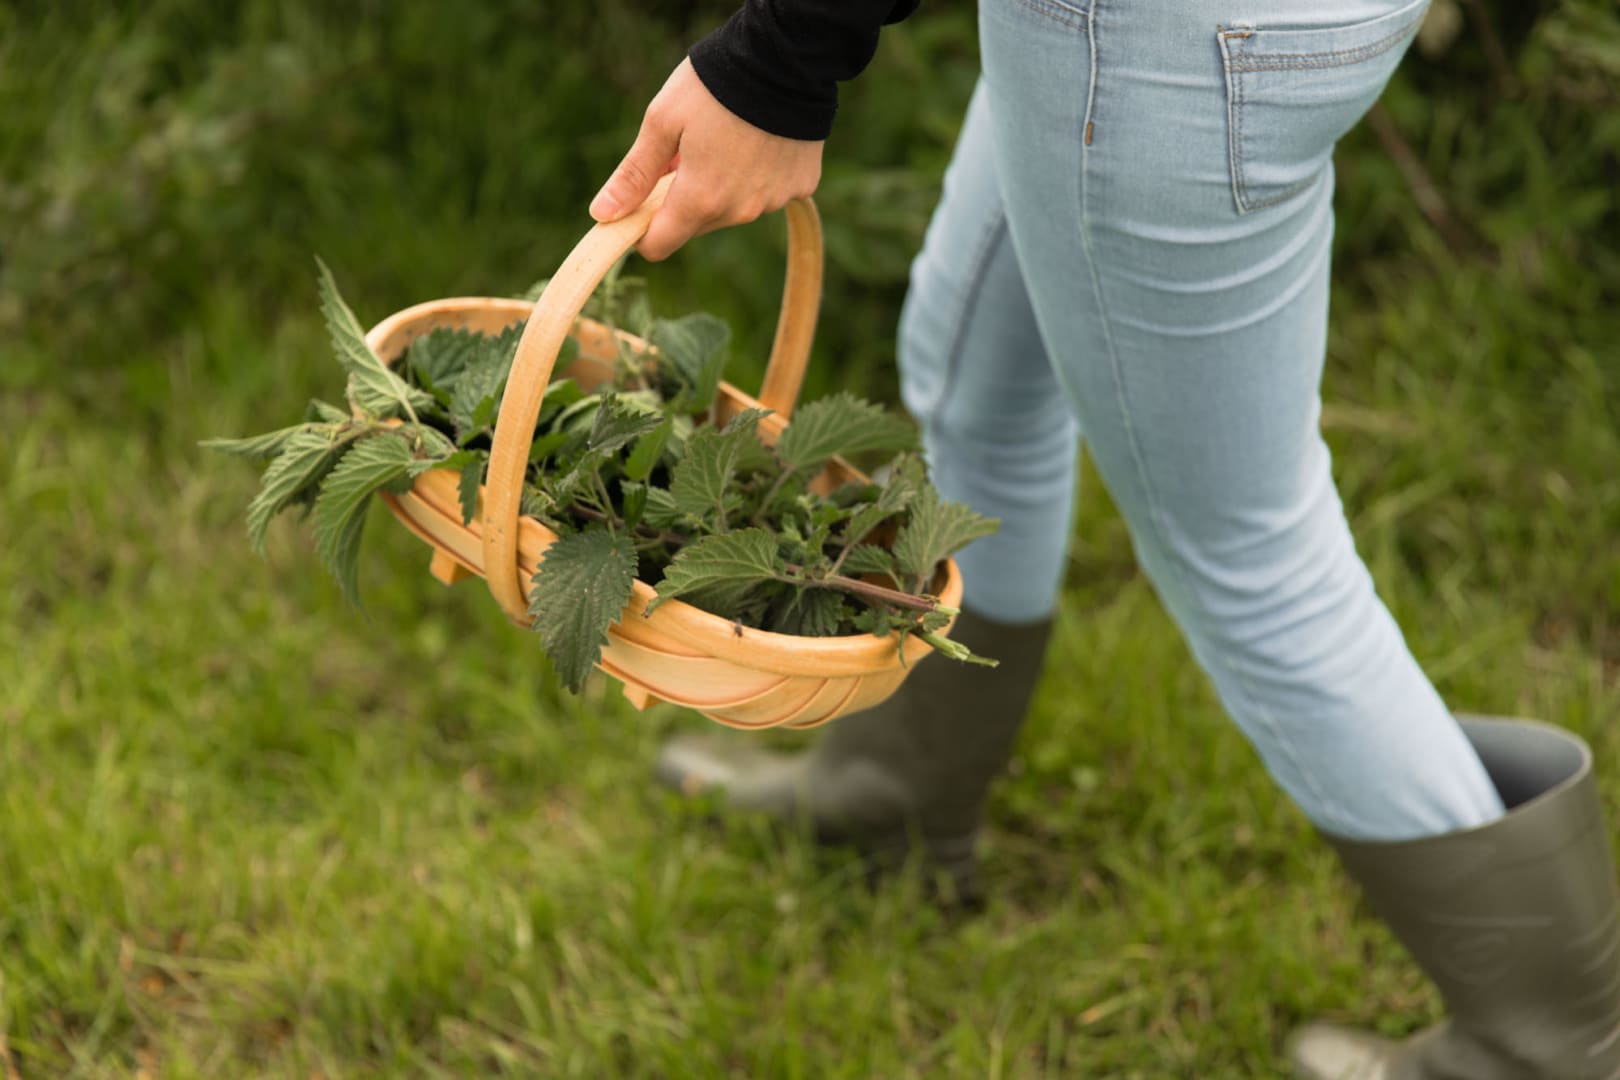 A person carrying some nettles they have foraged